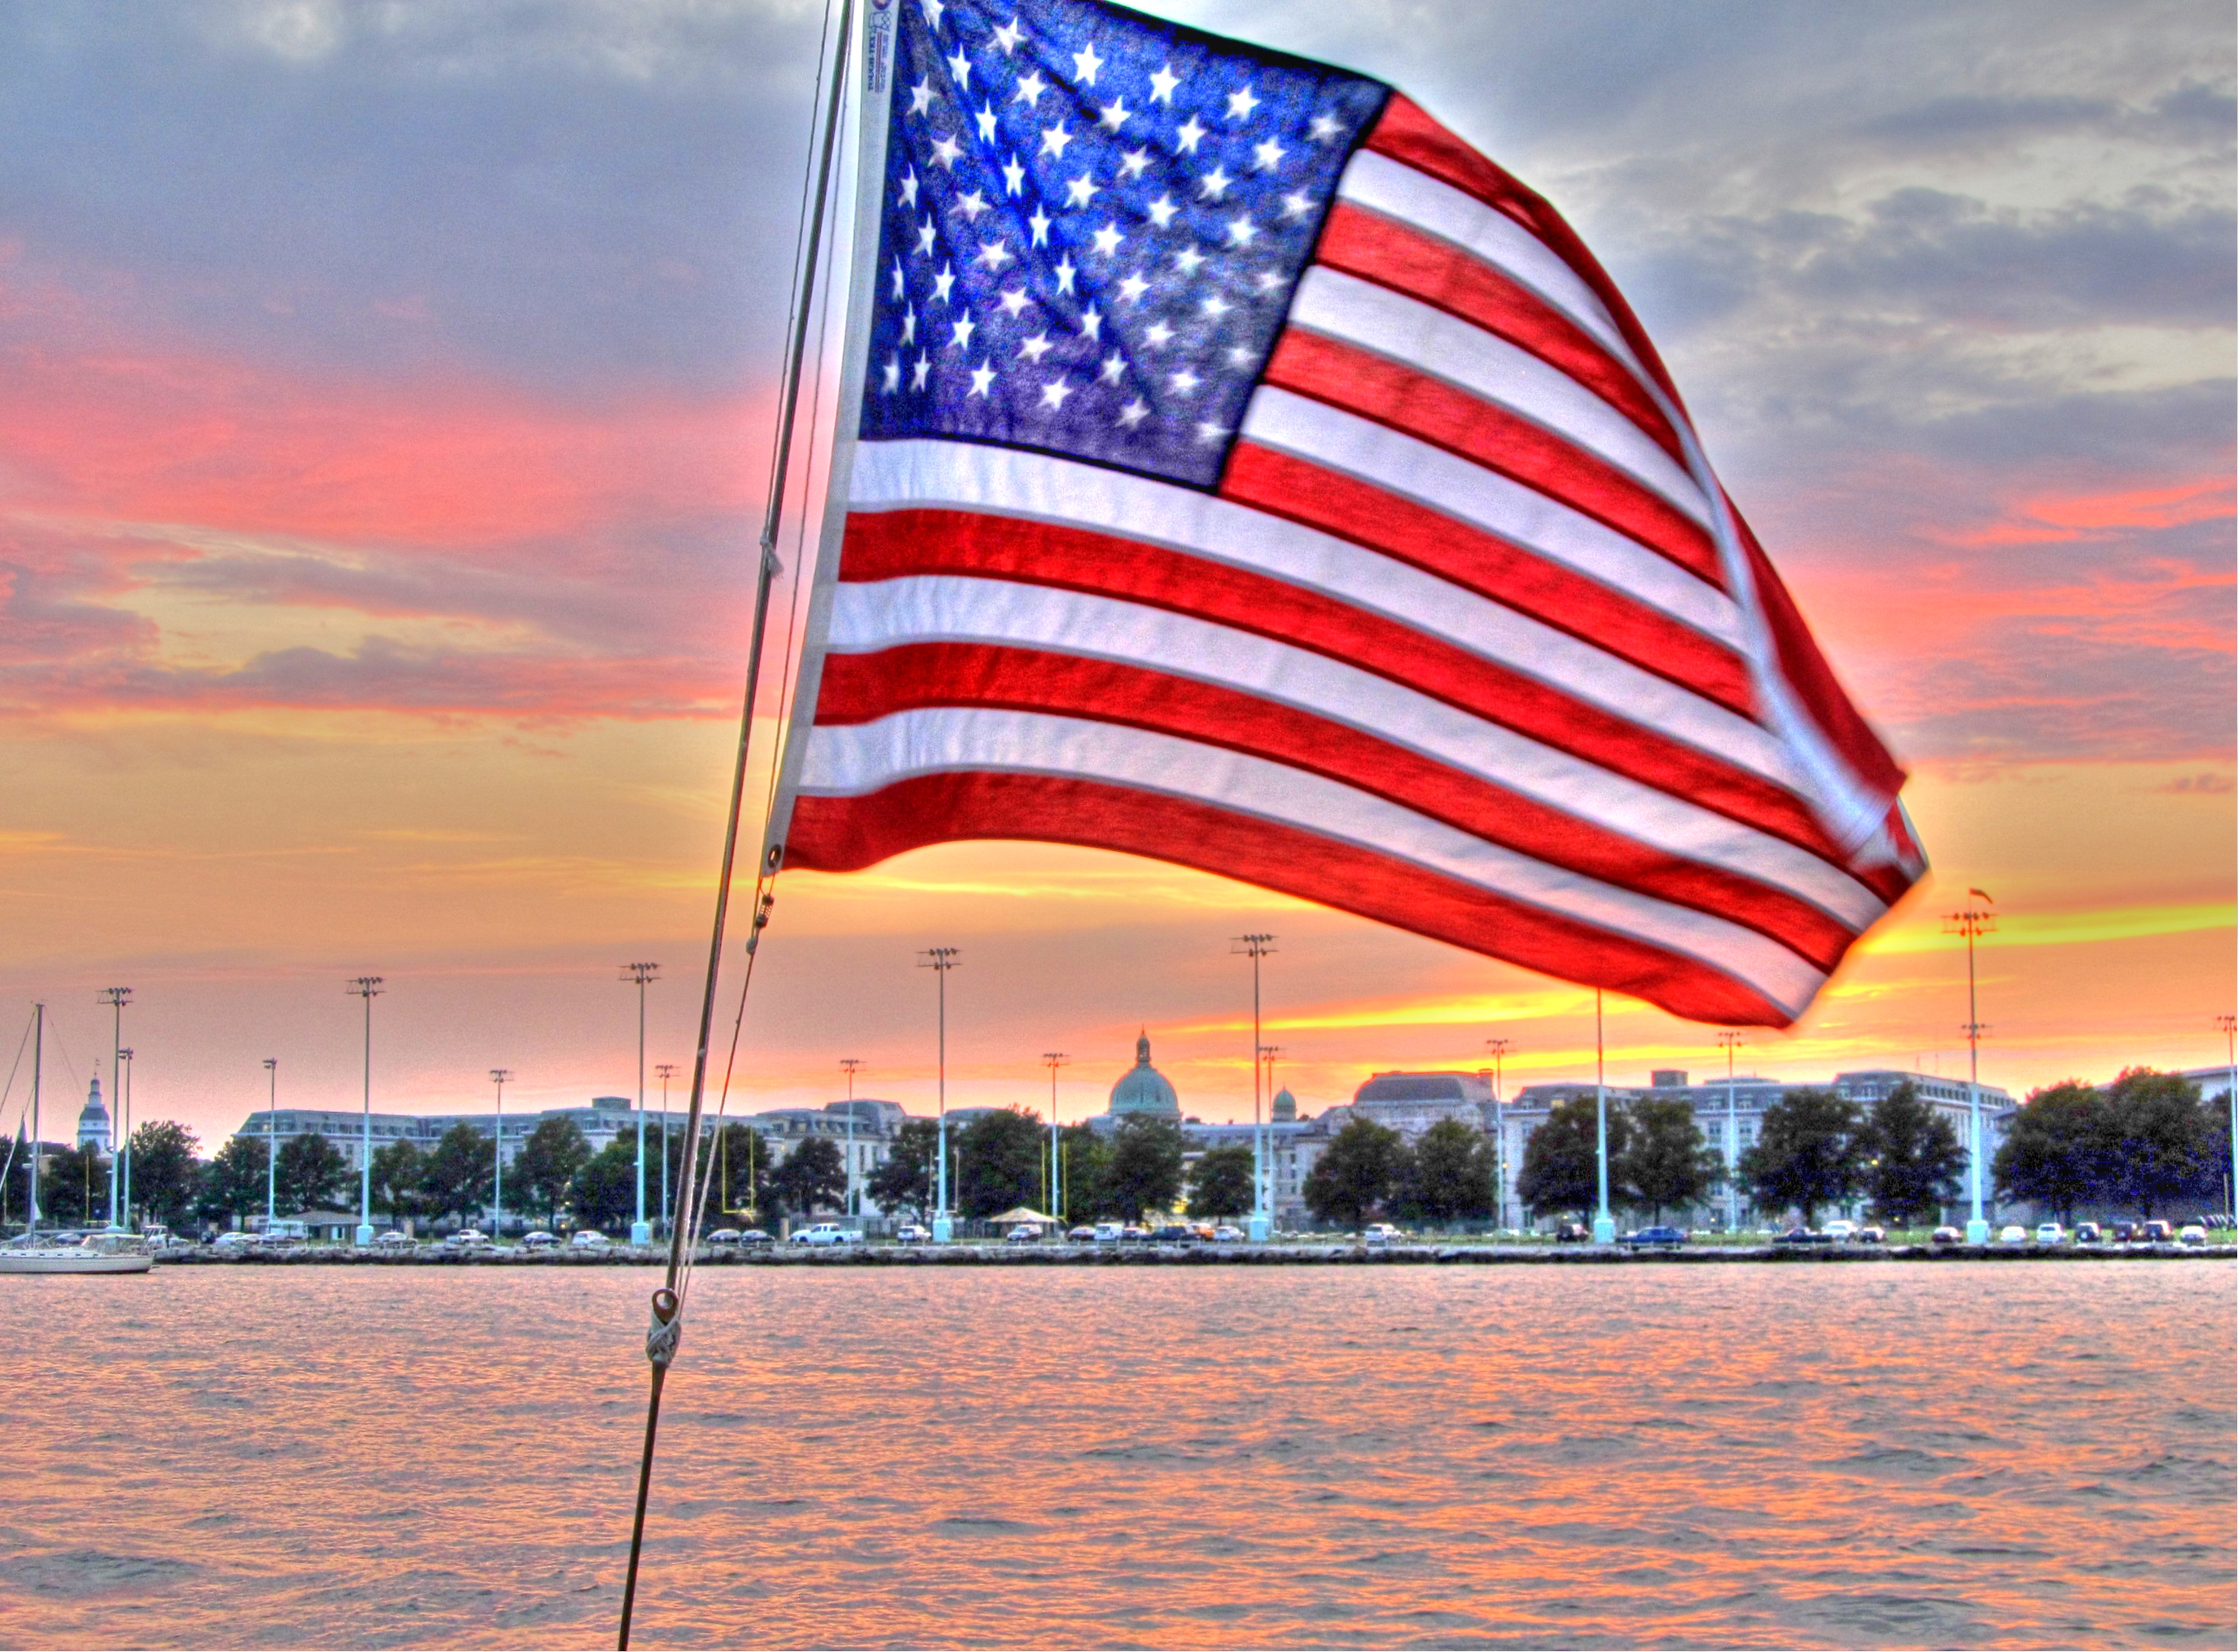 American flag from the Schooner with sunset and Naval Academy behind it